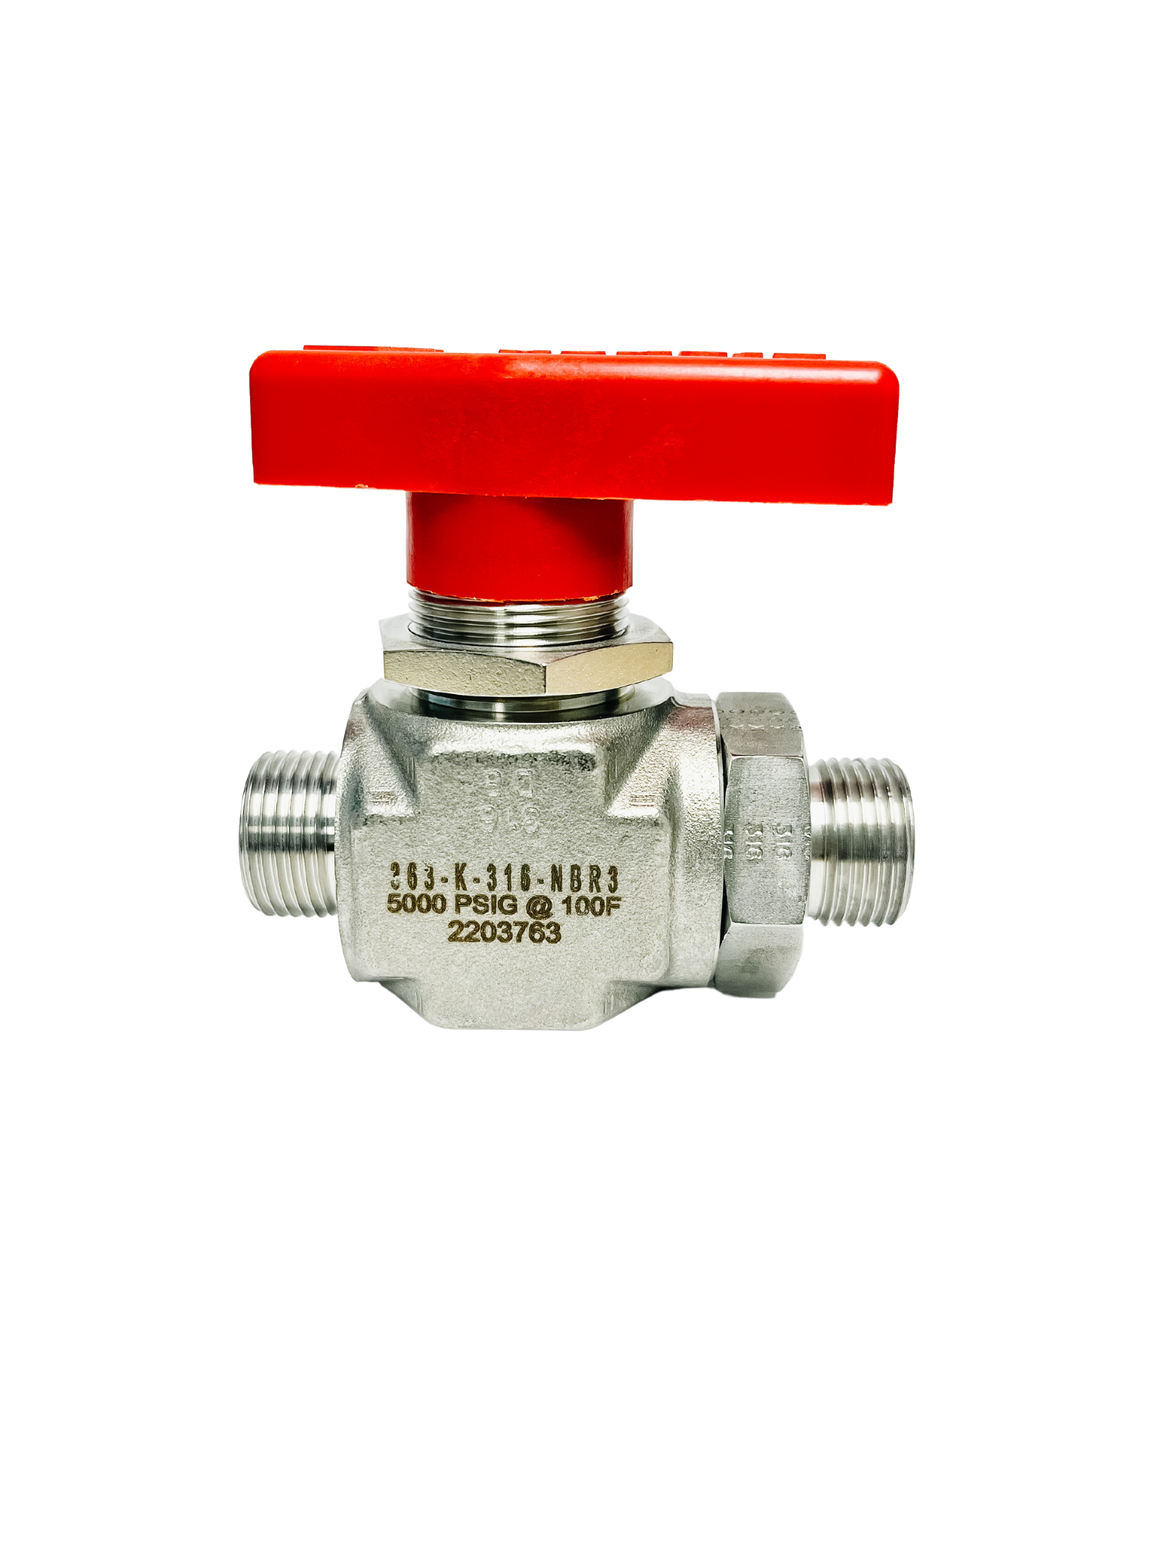 Flo-Lock 5000 PSI Two-Way Ball Valve -8M ORFS Ends - Stainless Steel